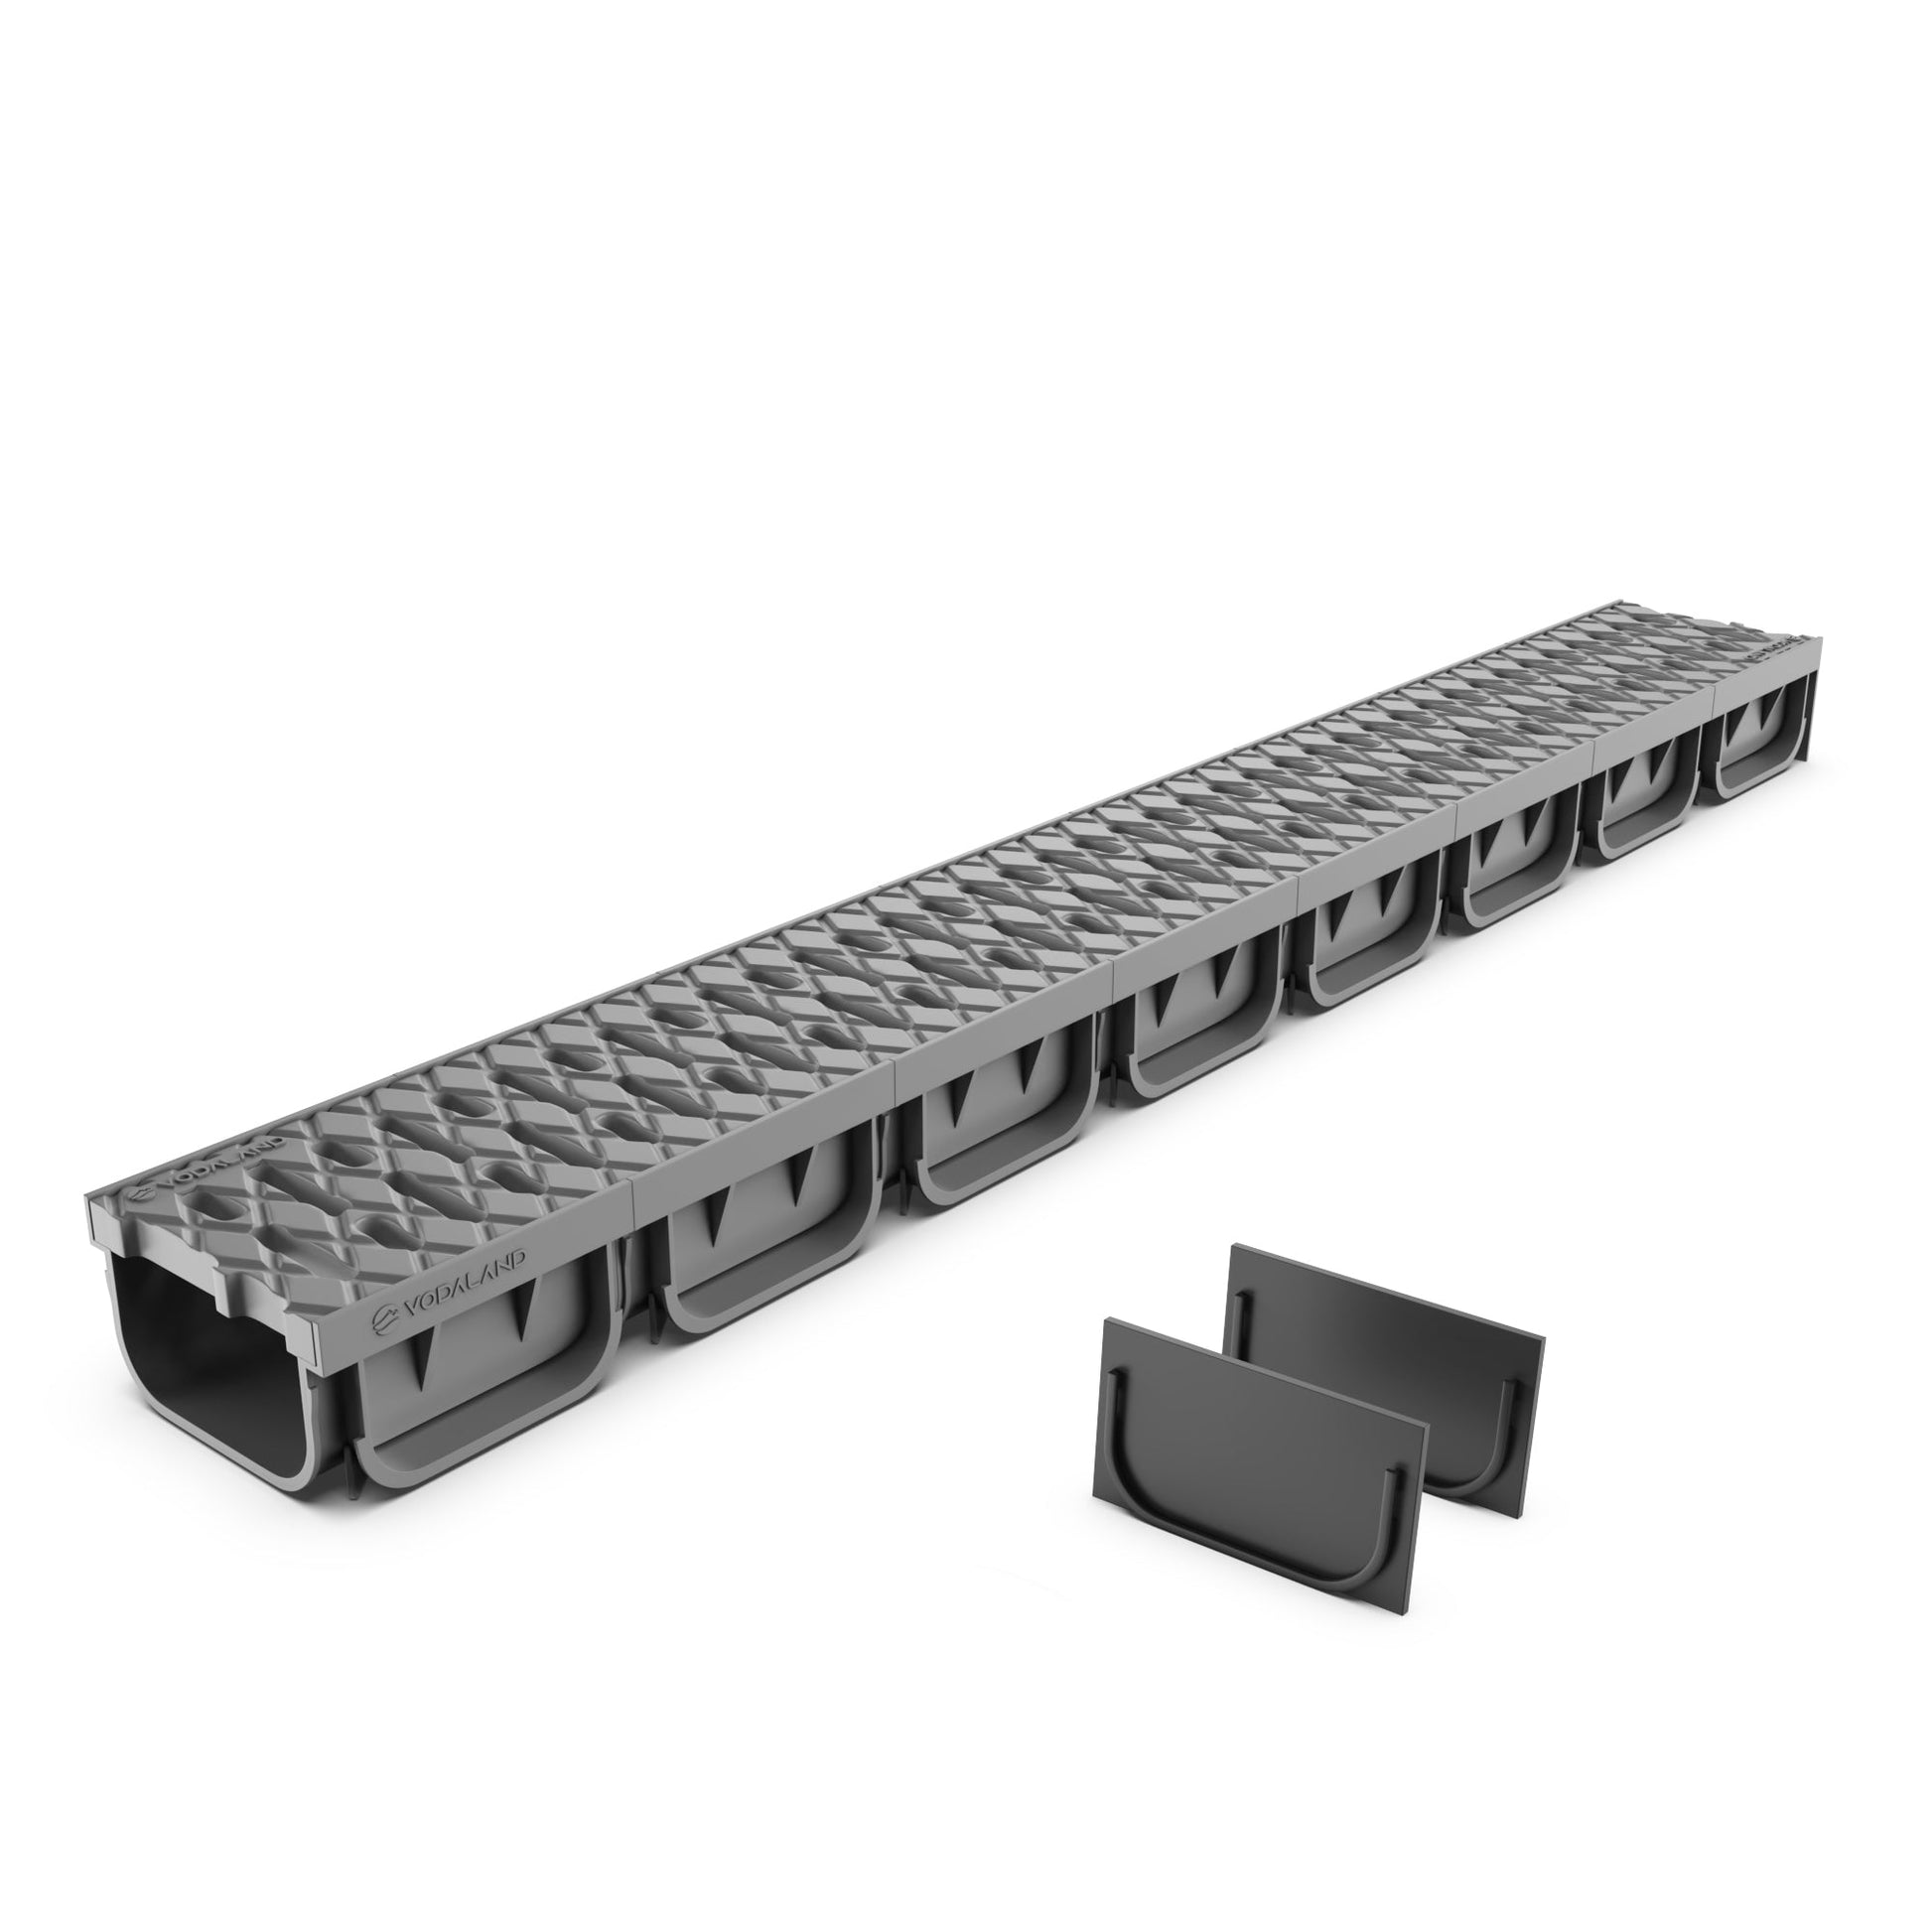 Vodaland - 4 inch Trench Drain System with Grate - Gray - Easy 2 (1)